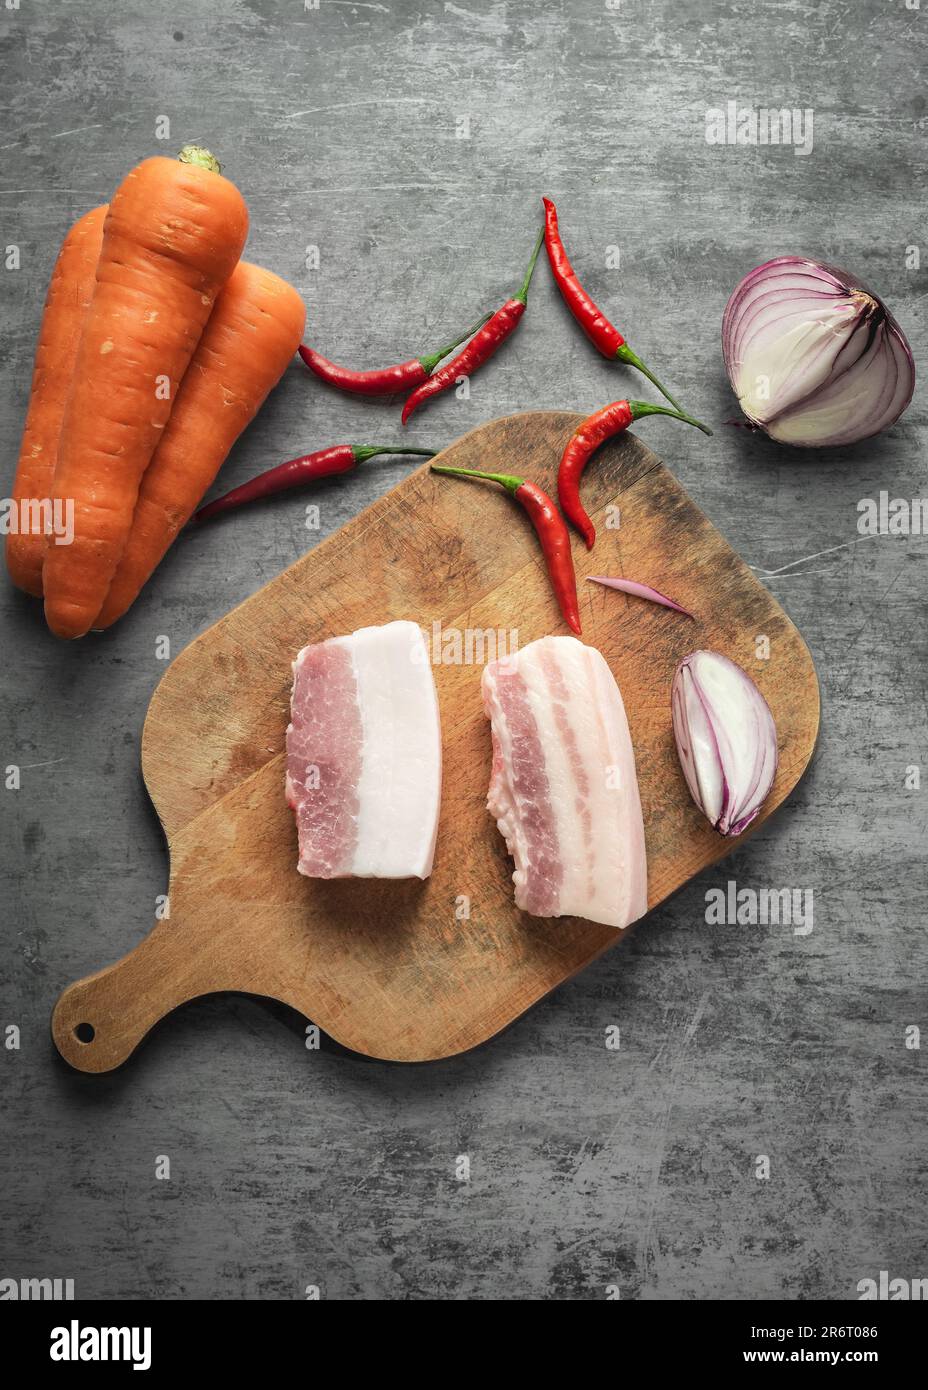 Carrots, chili peppers, pork belly, and onions placed on a table board. Stock Photo